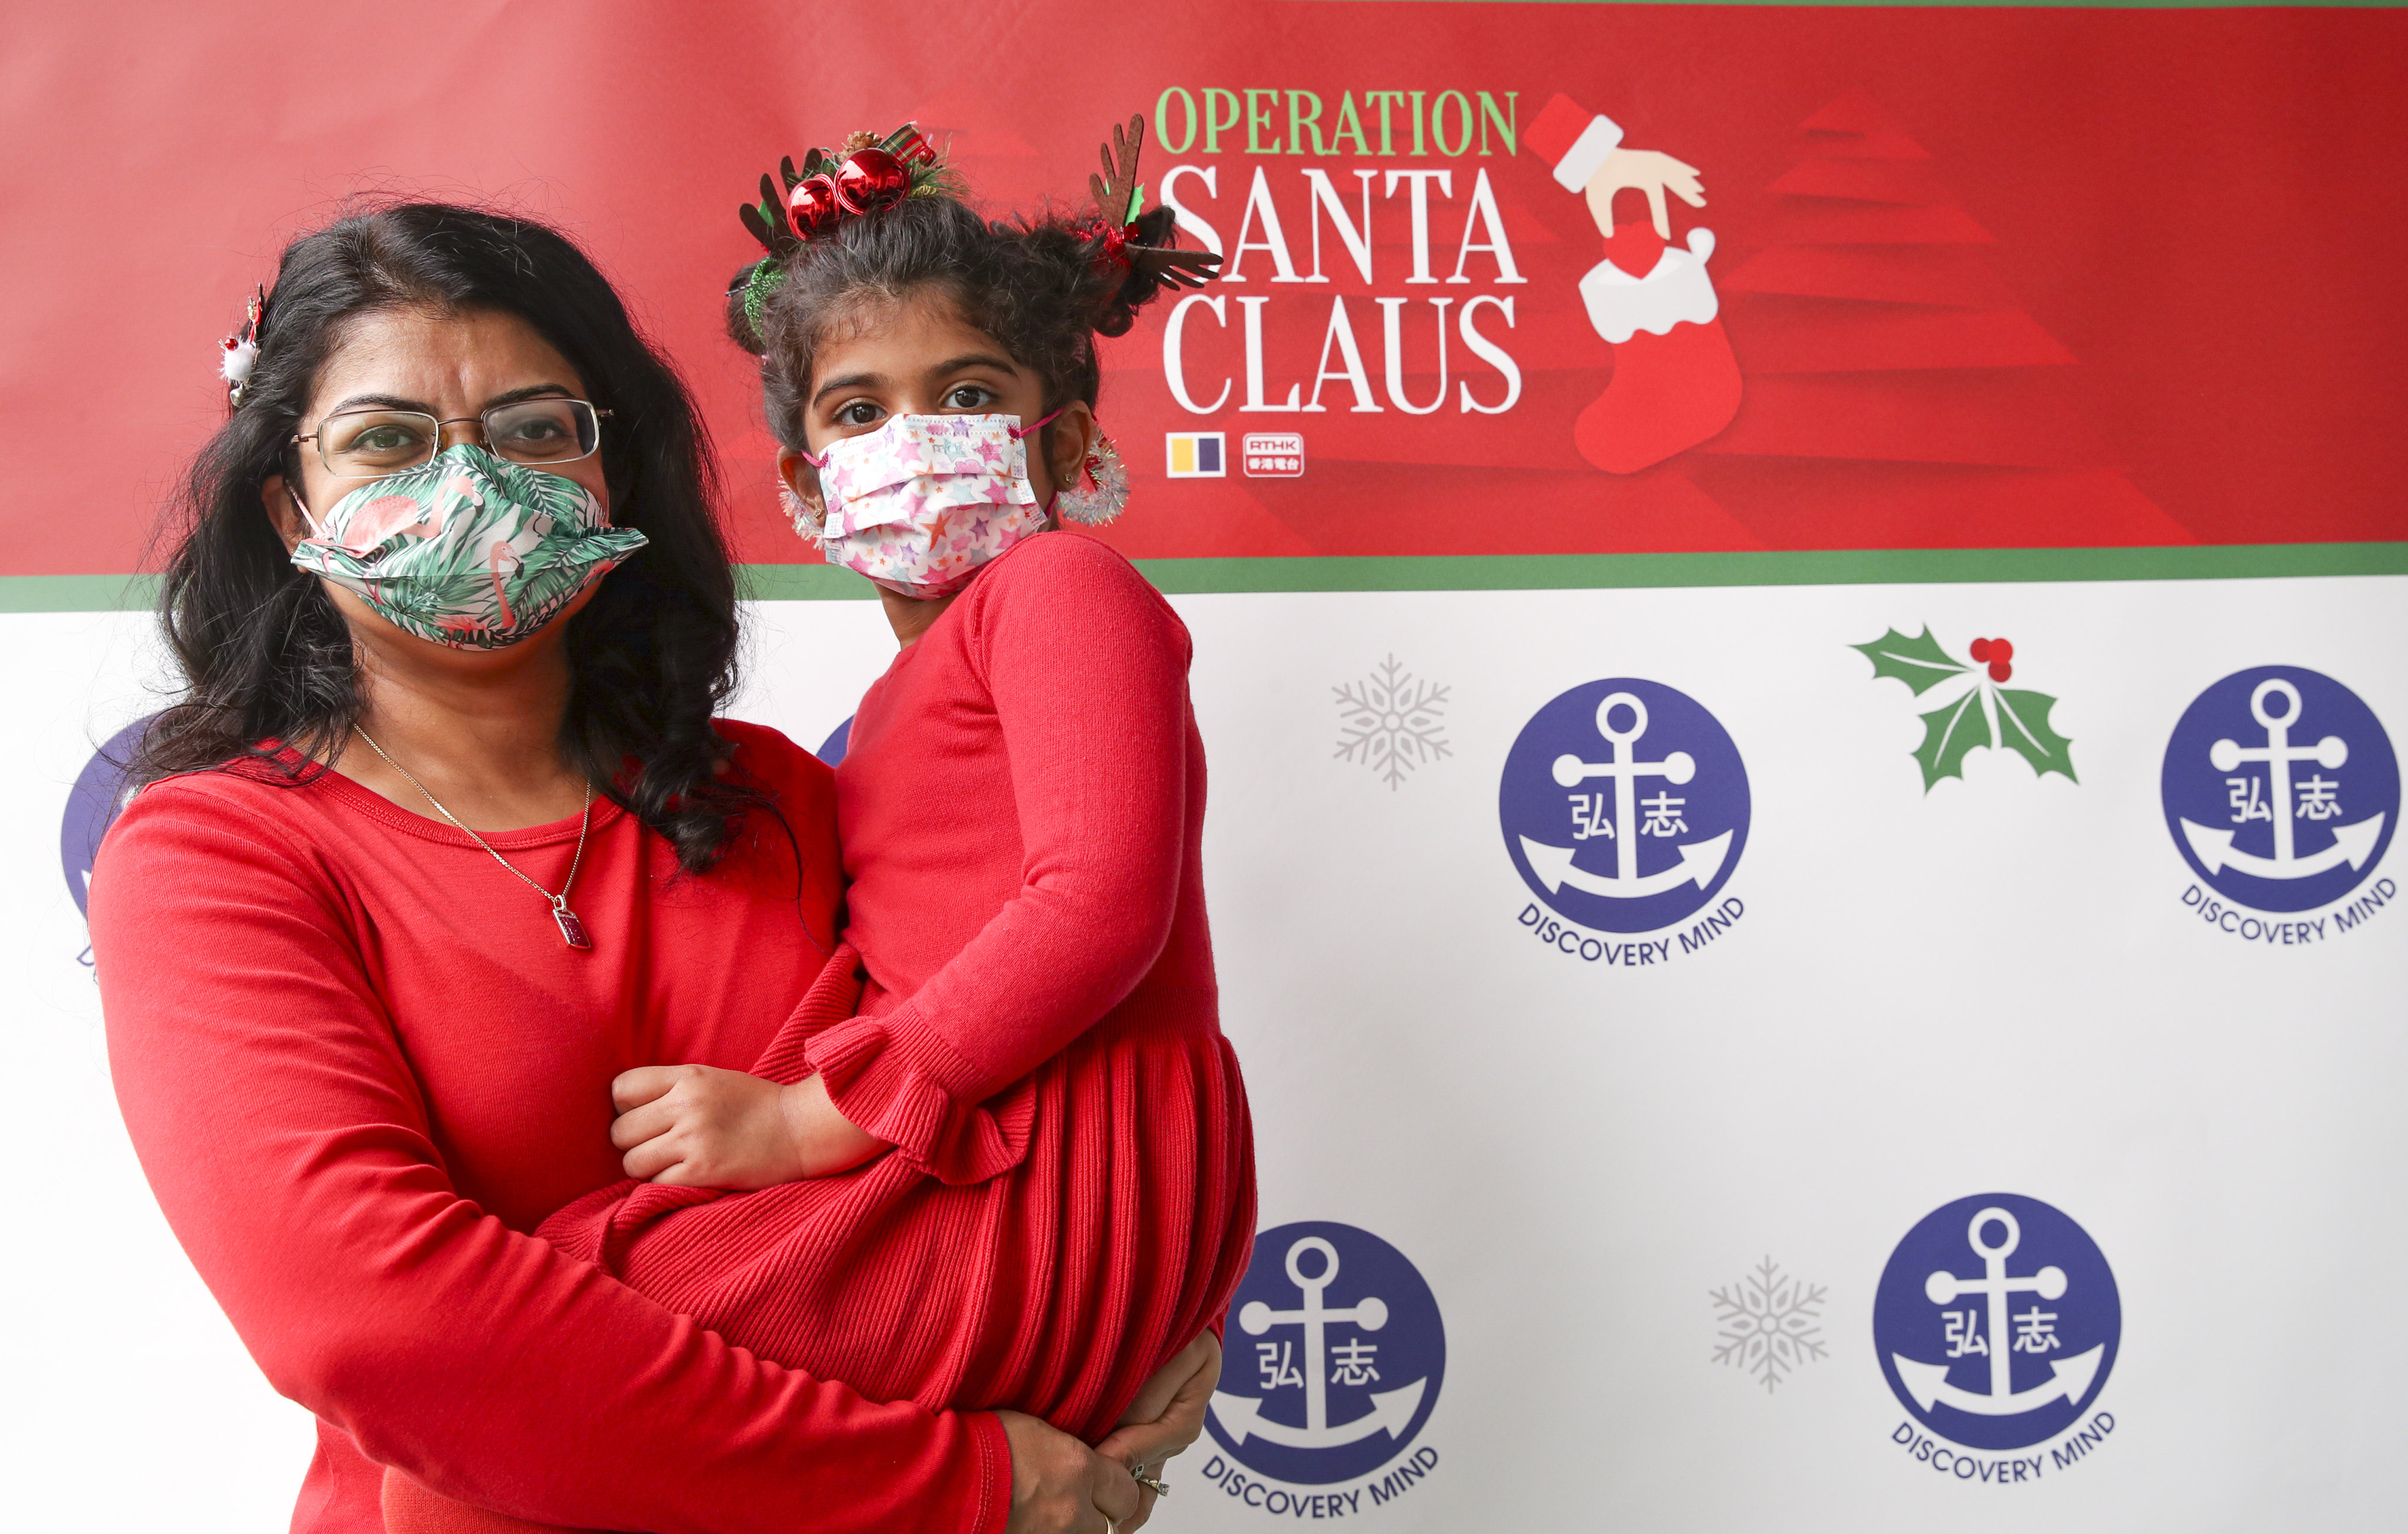 (L to R) Dayanthi Panabokke and her daughter Dulari Ihalagama pose for a picture at Discovery Mind Primary School and Kindergarten in Tung Chung during a fundraiser for Operation Santa Claus. Photo: SCMP/ Edmond So